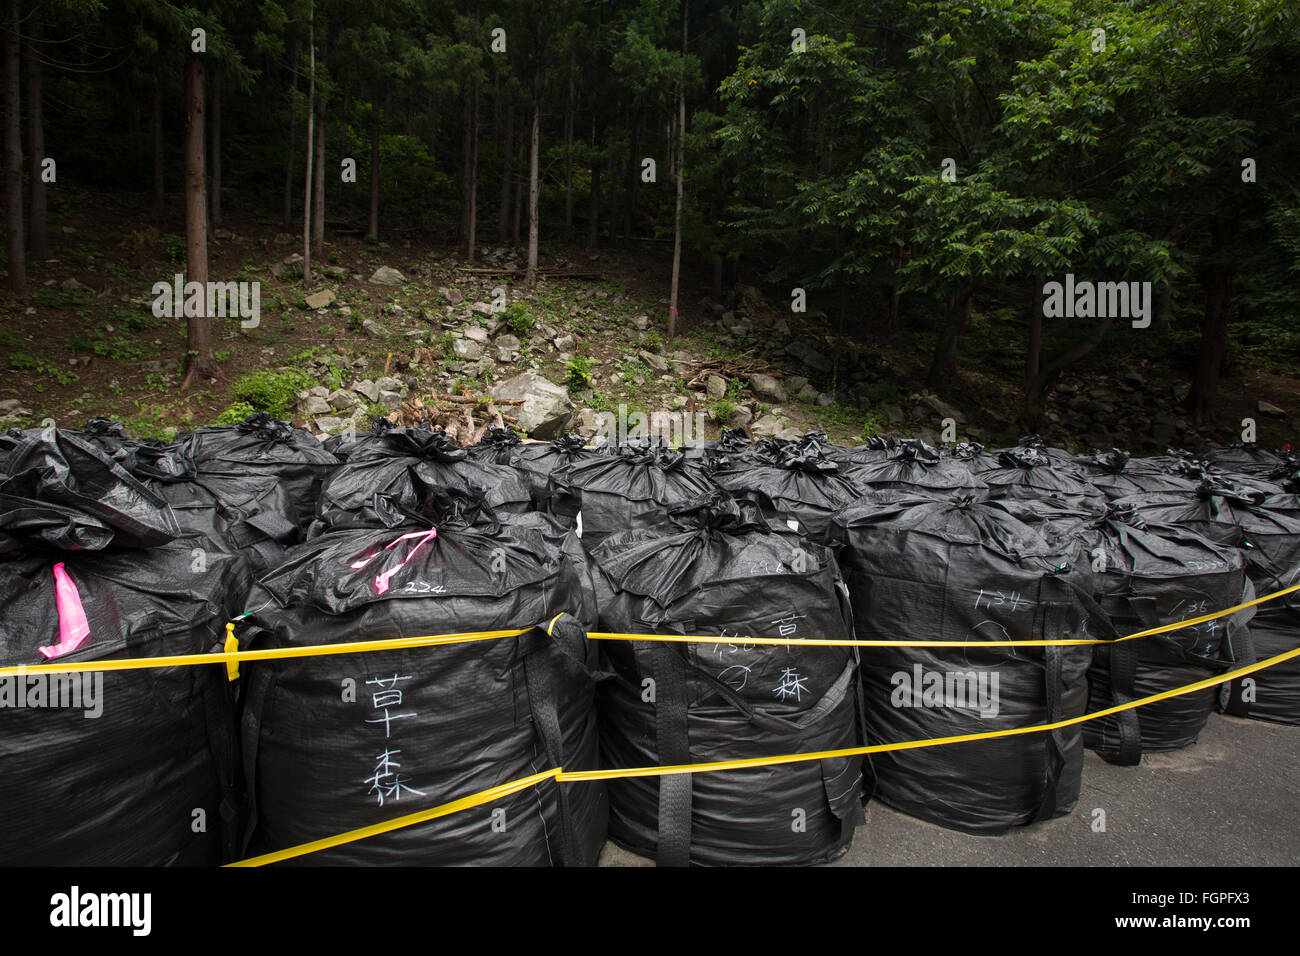 Bags of radioactive waste lay in forest during radioactive decontamination process of Iitate district, Japan. Stock Photo